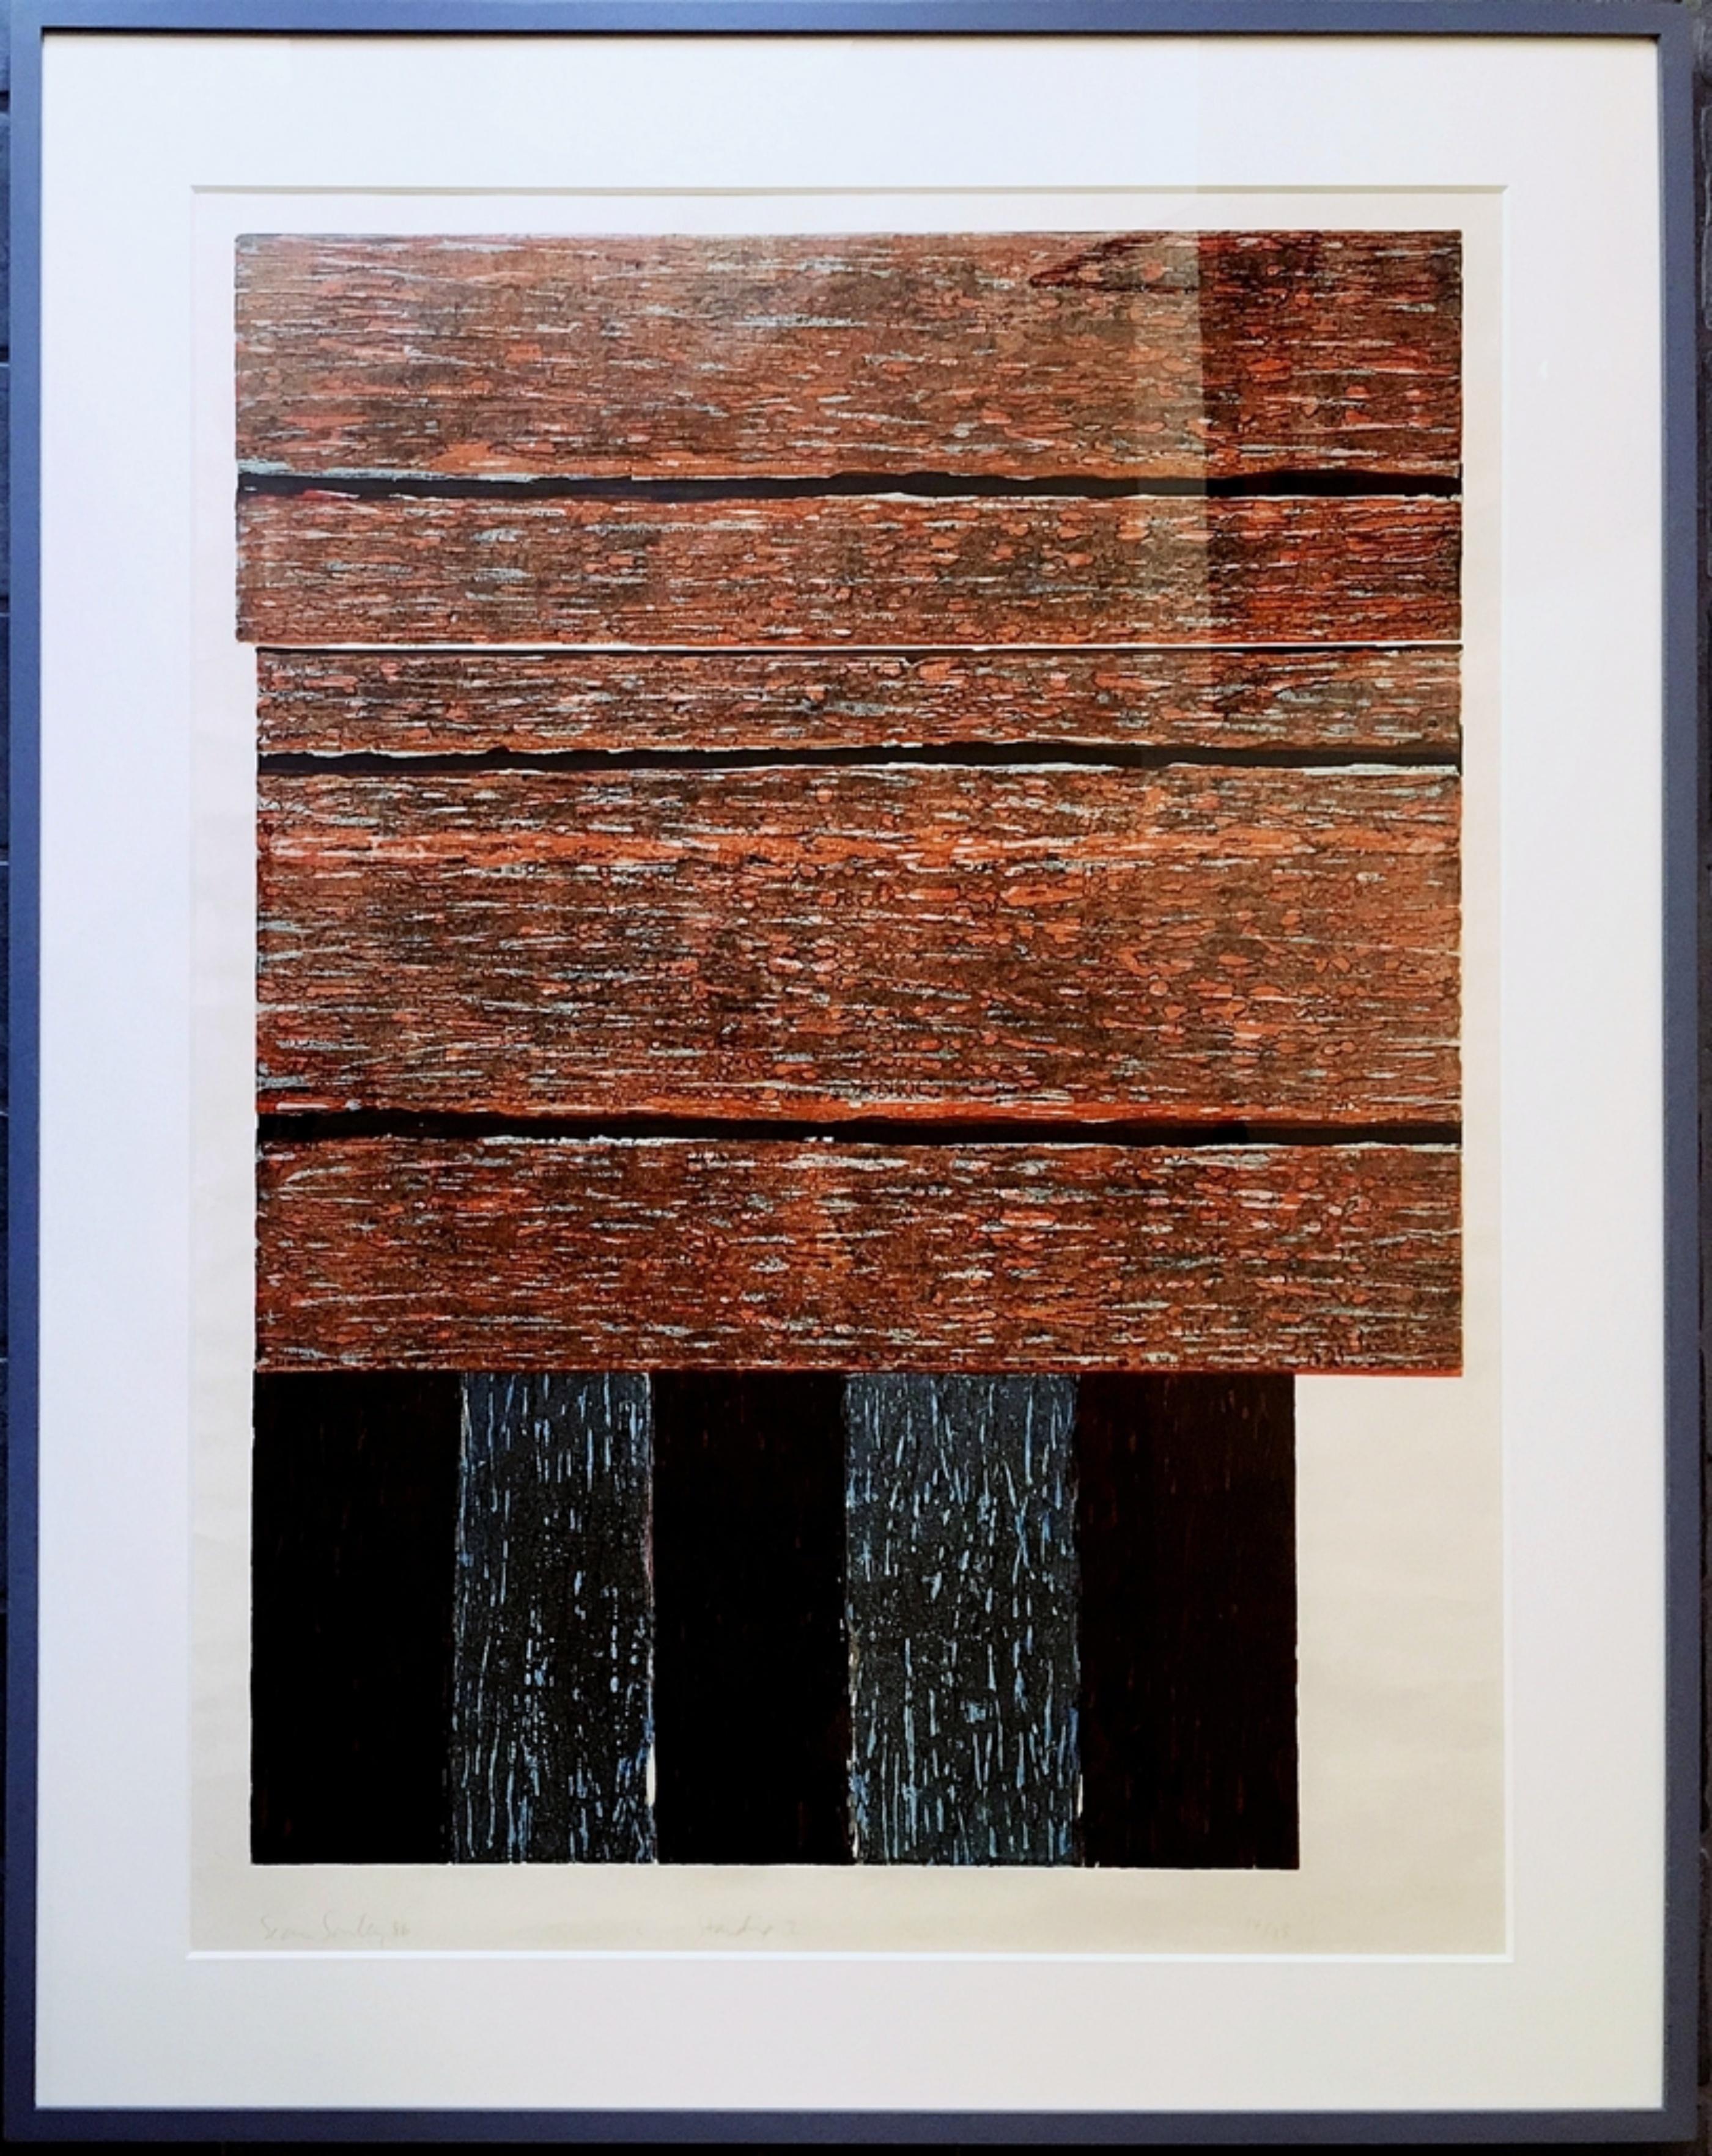 Sean Scully
Standing 2, 1986
Color Woodcut
Signed, inscribed with title and numbered from the limited edition of only 35 in graphite on the front. Matted and elegantly framed in handmade wood frame with UV plexiglass
Frame